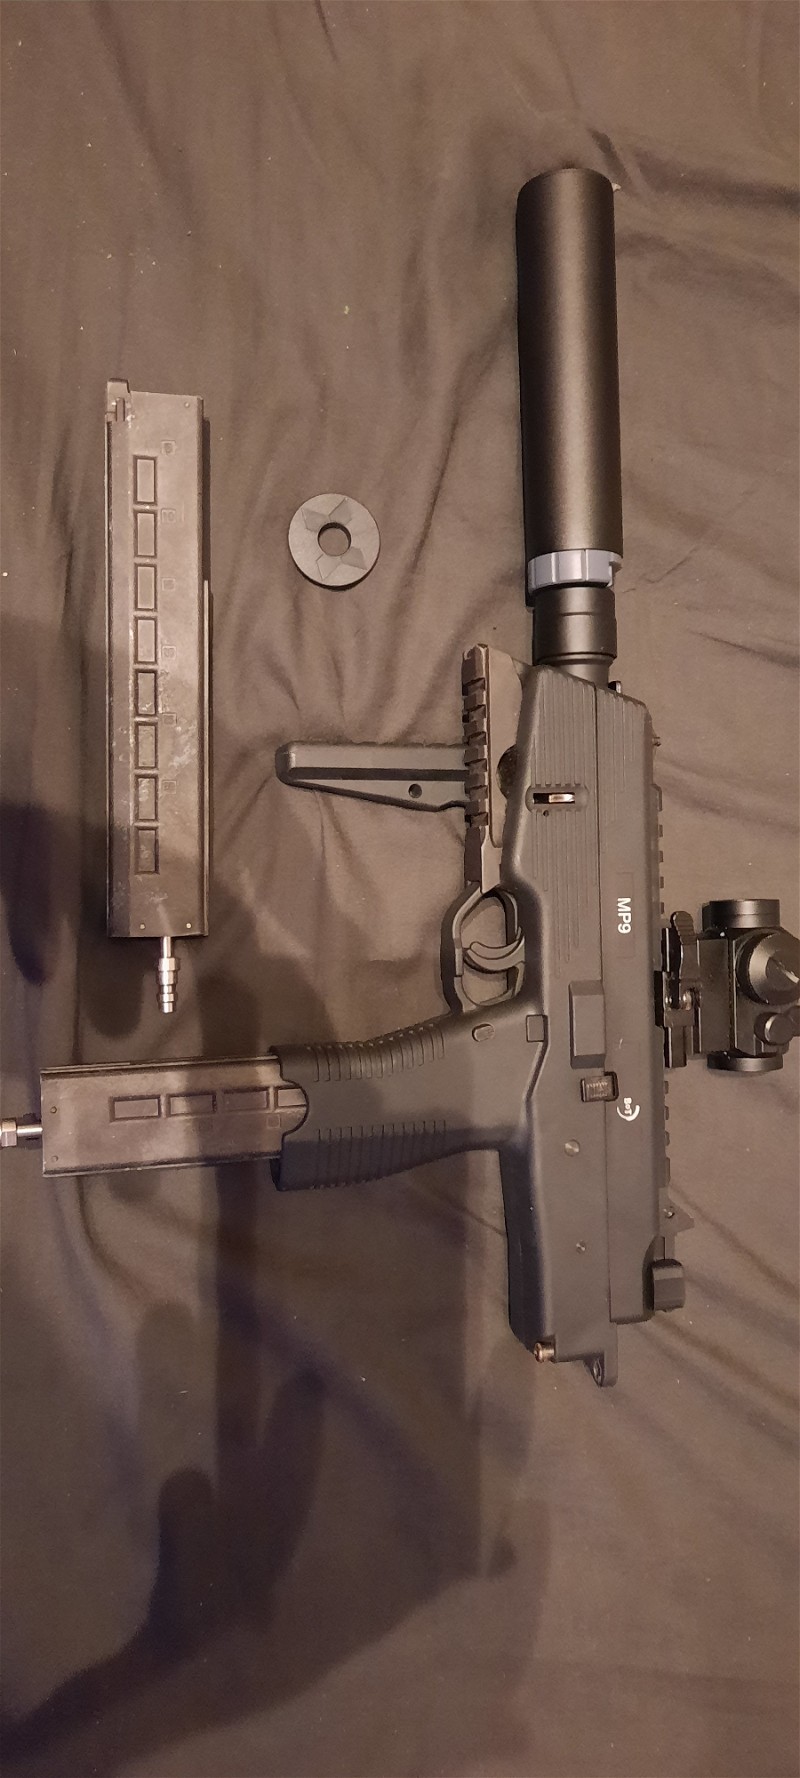 Image 1 for Asg mp9 met 2 hpa mags scope en tracer unit